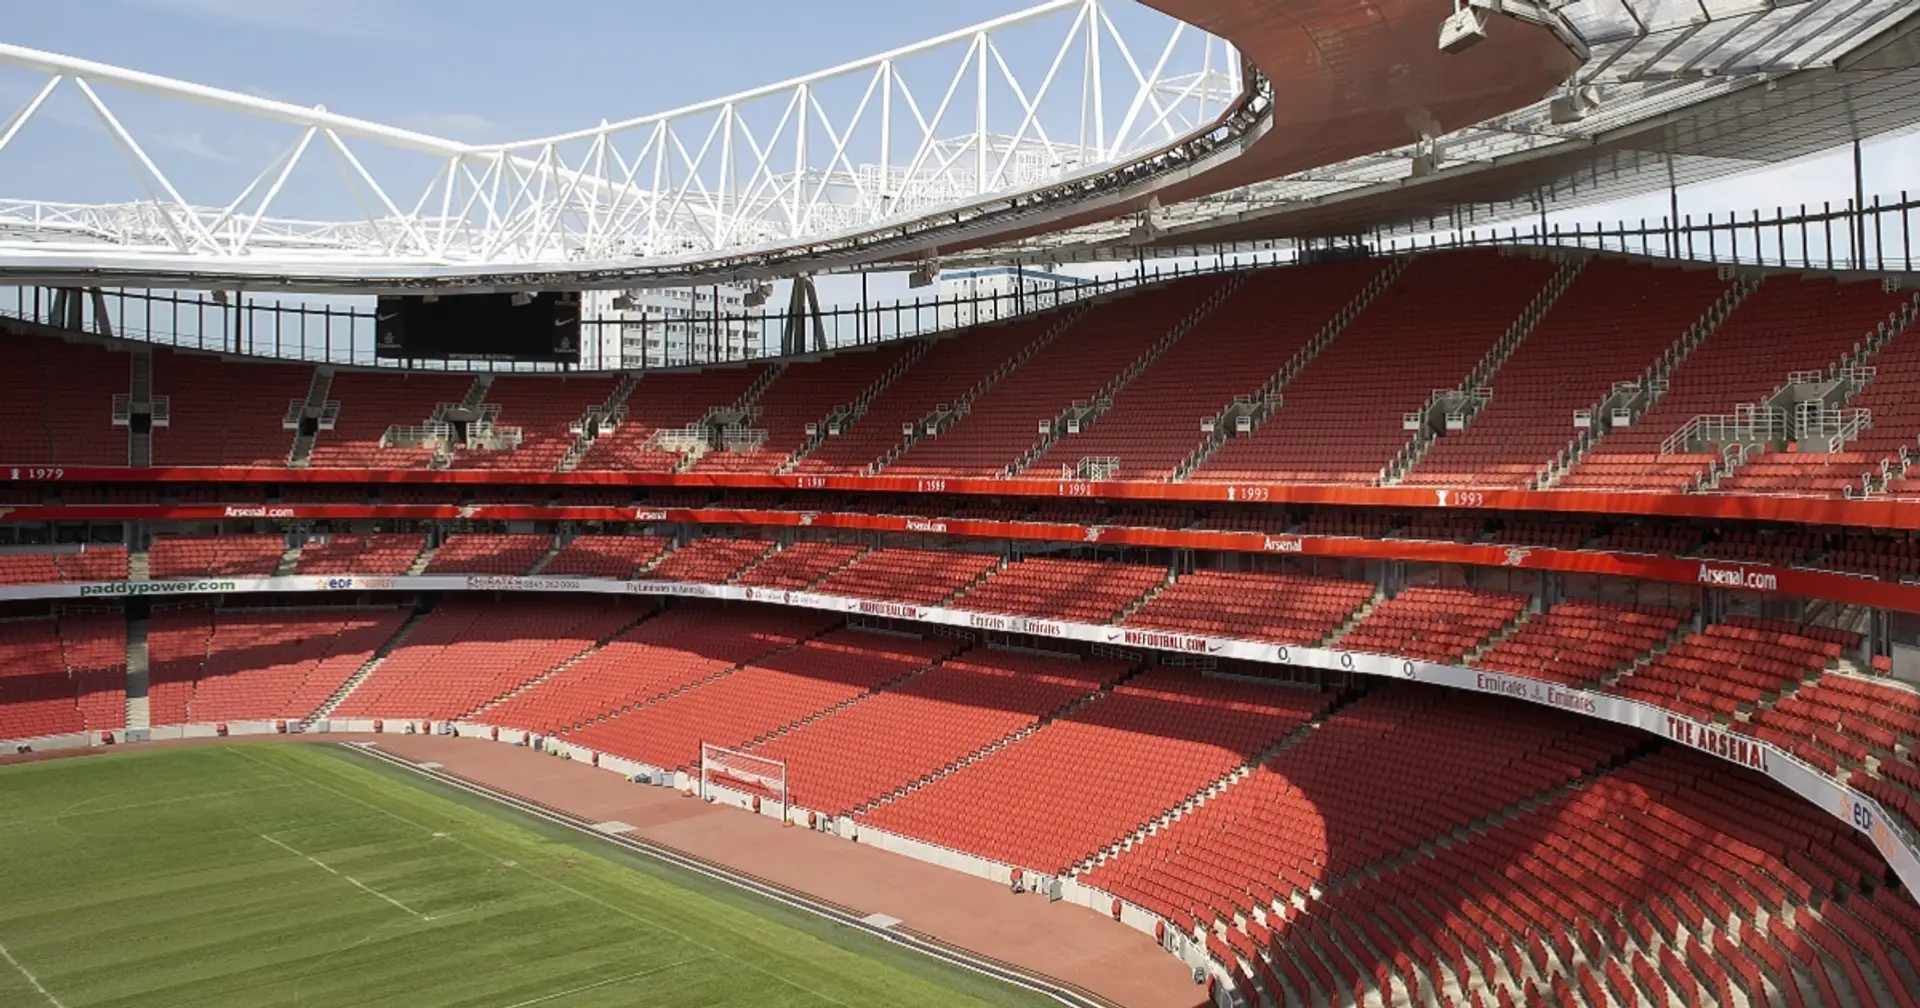 No more fans at the Emirates as London moves into tier 3